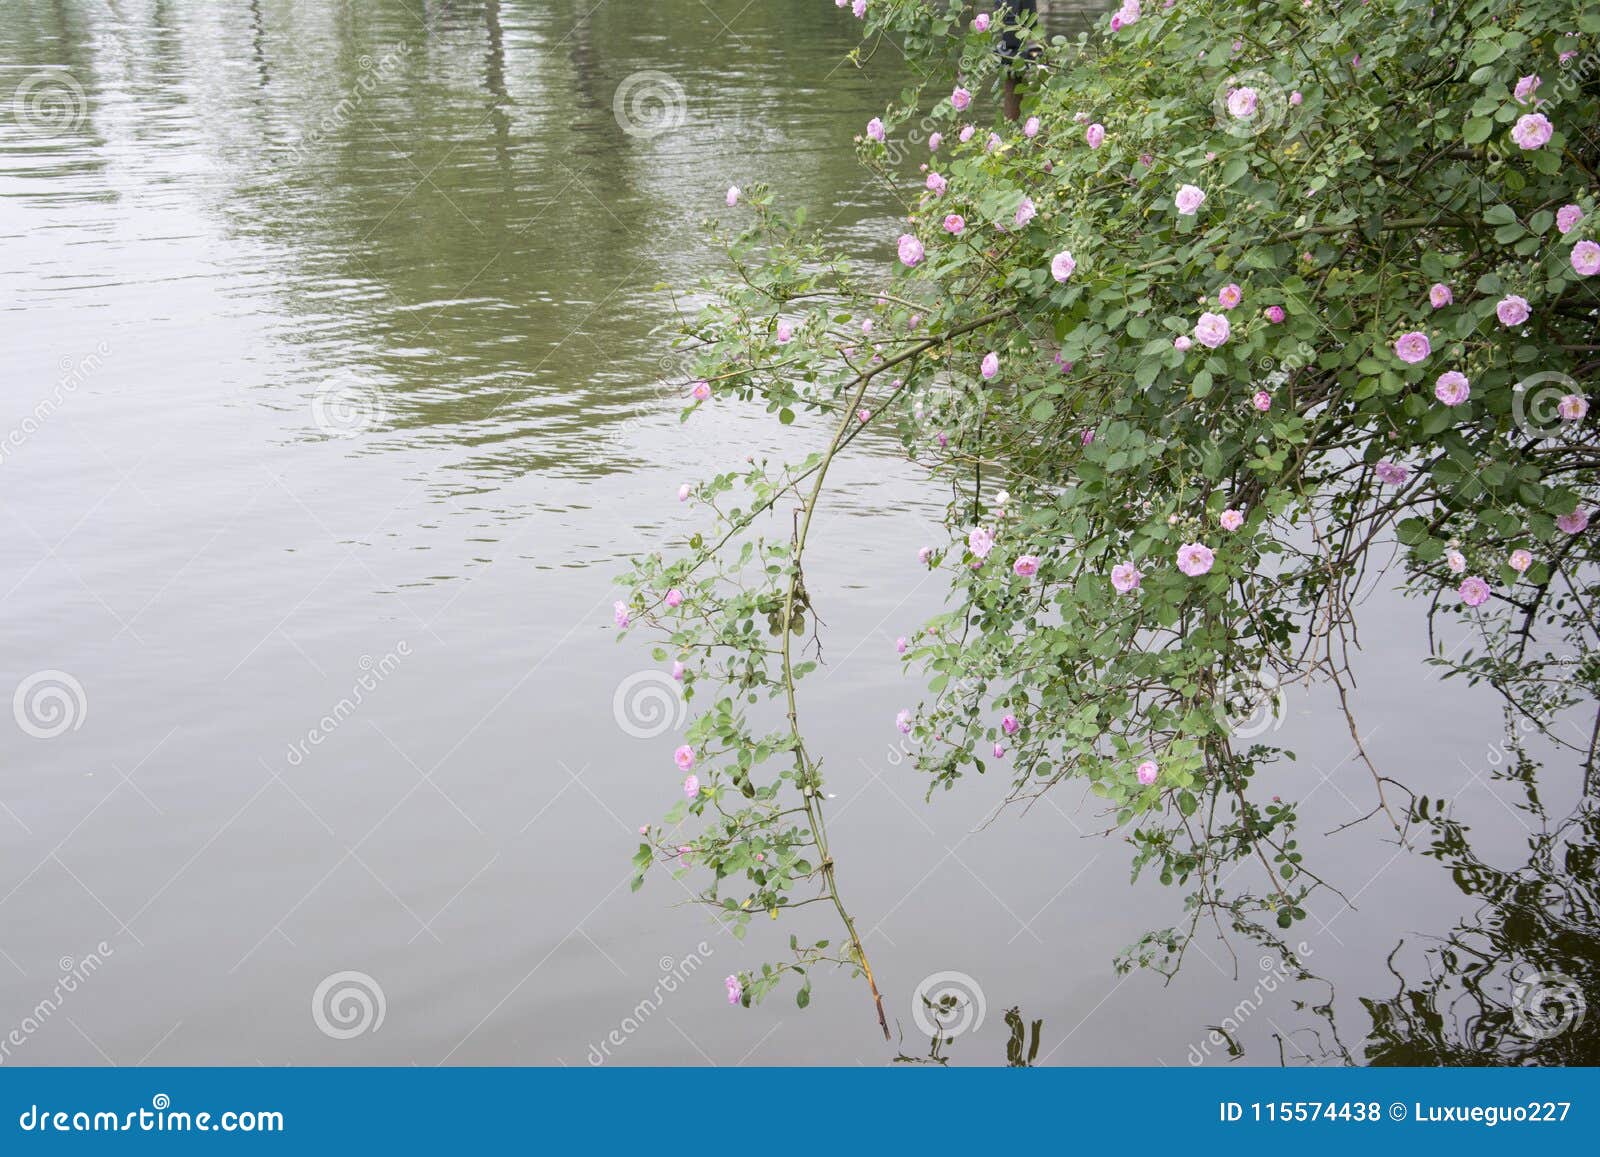 The Open Rose Flowers on the Edge of the Lake Stock Photo - Image of ...